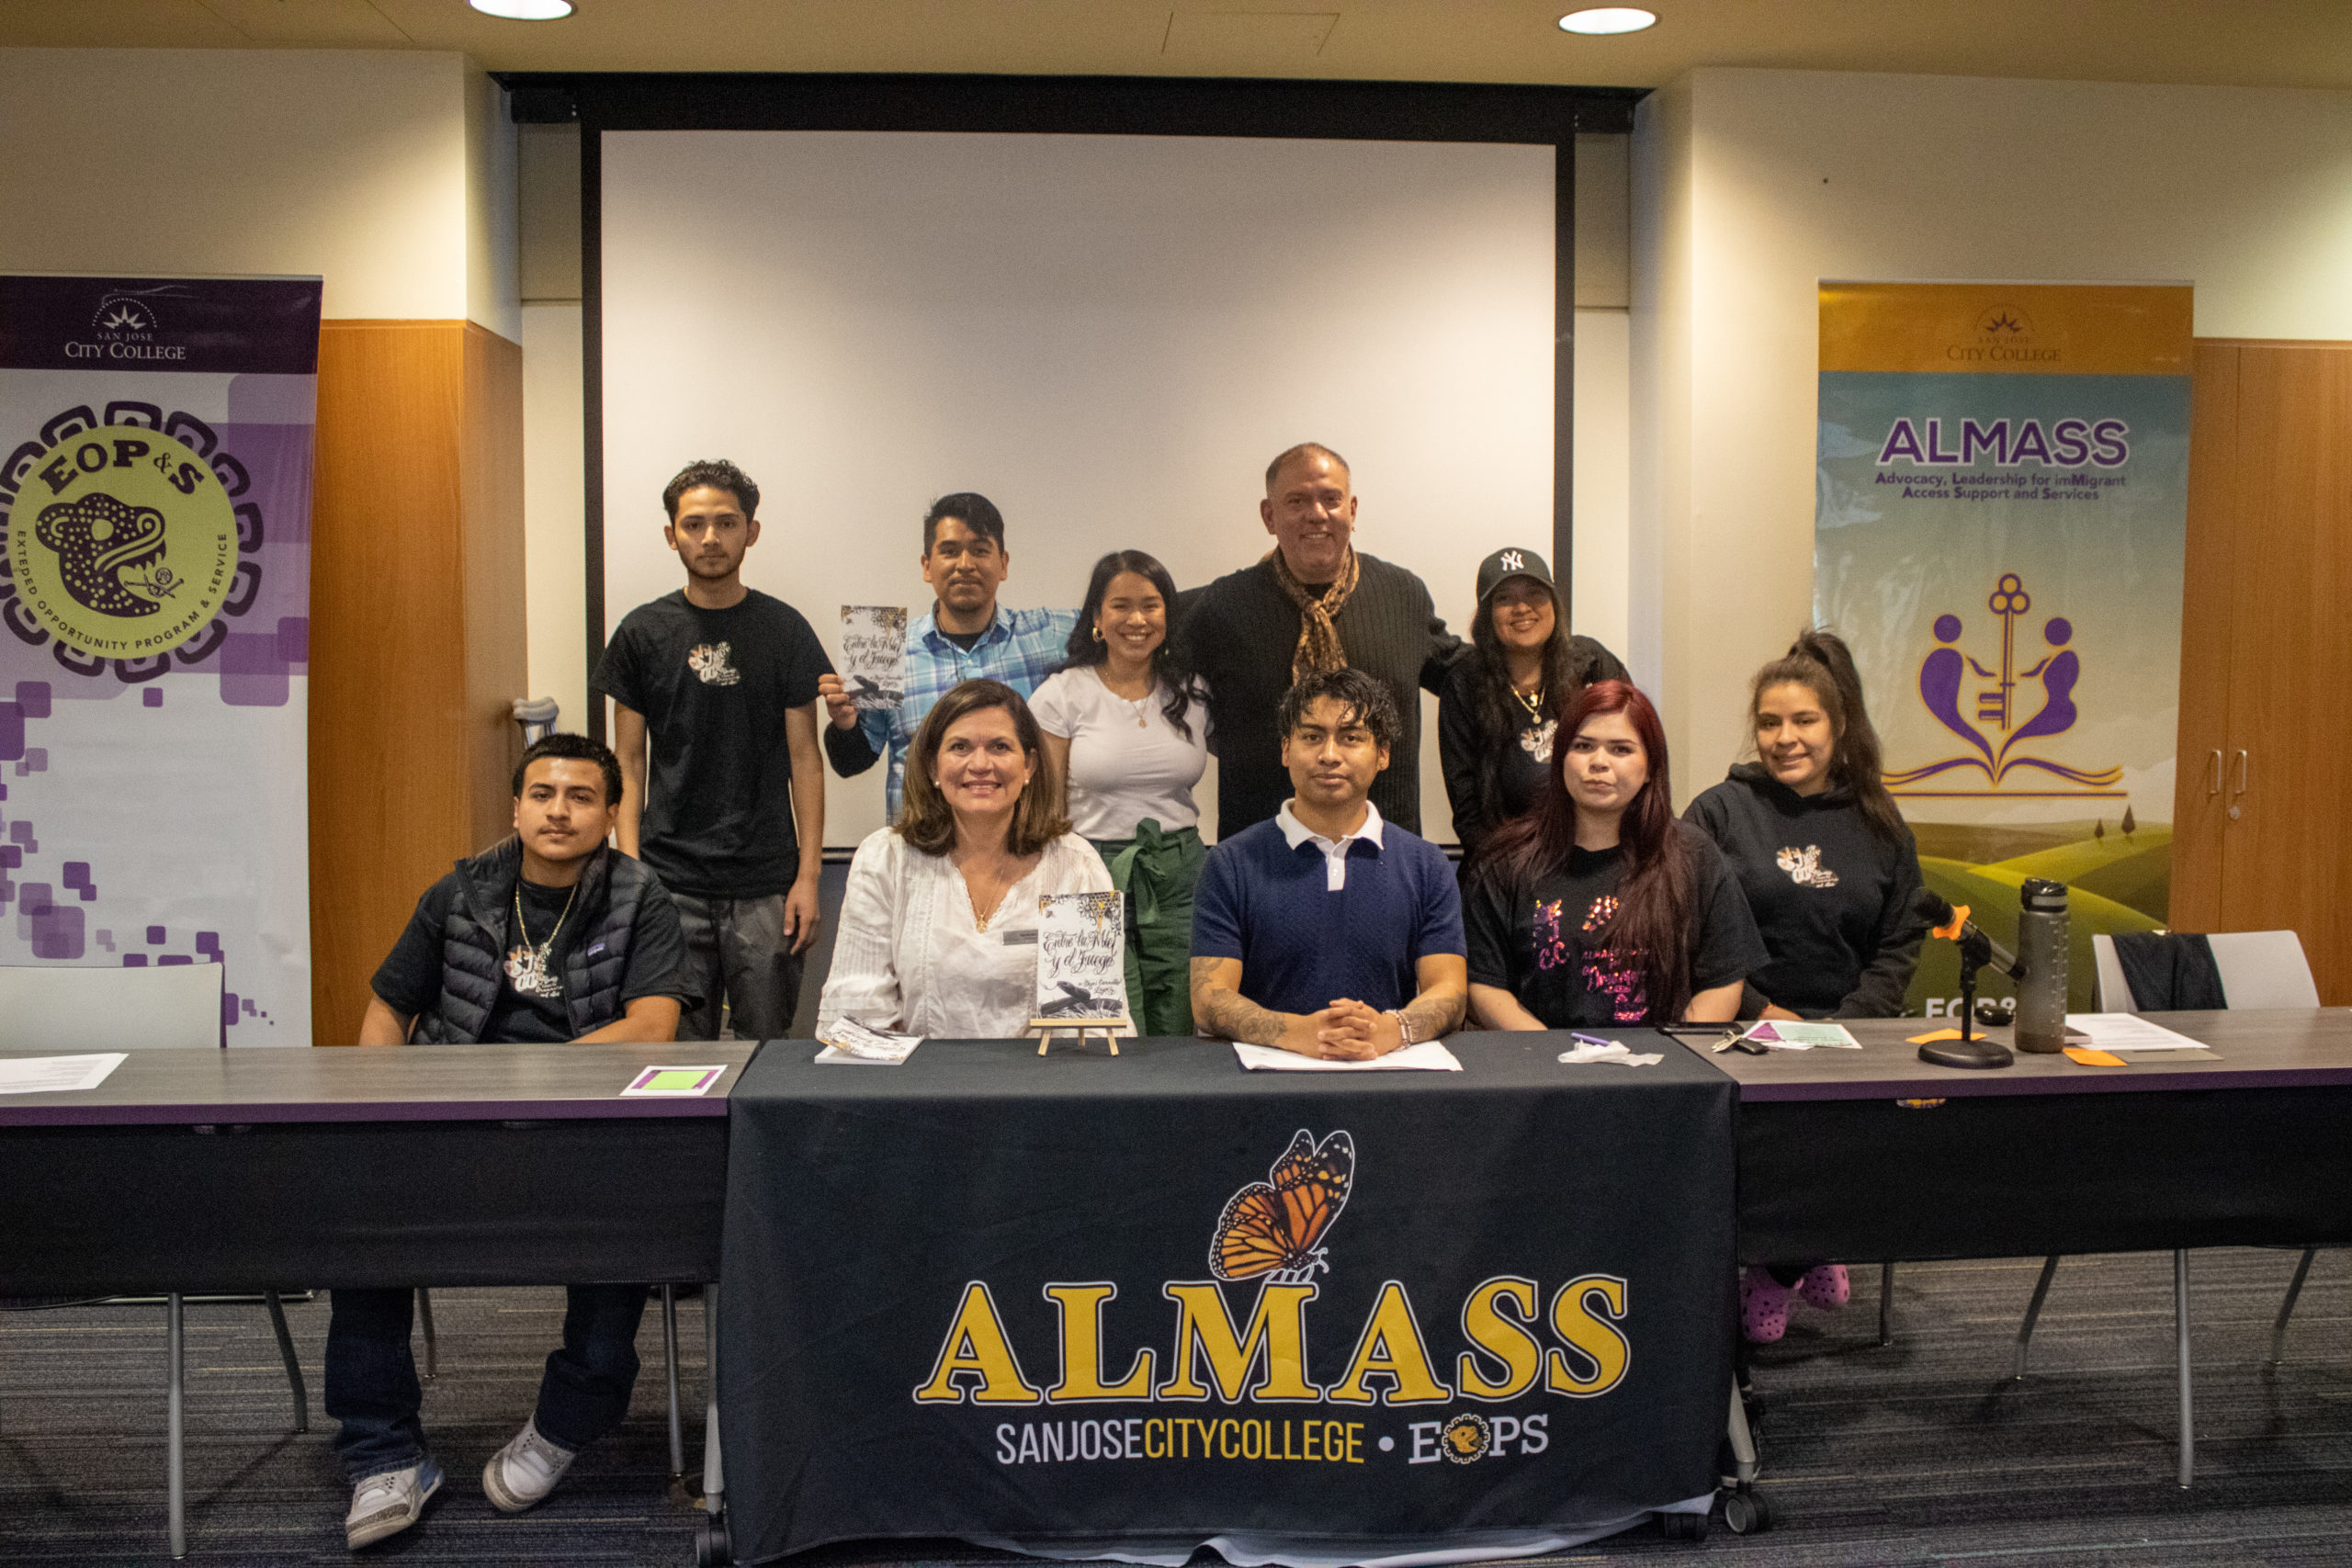 ALMAAS members pose for group photo in room SC-203 Friday afternoon, April 22nd.